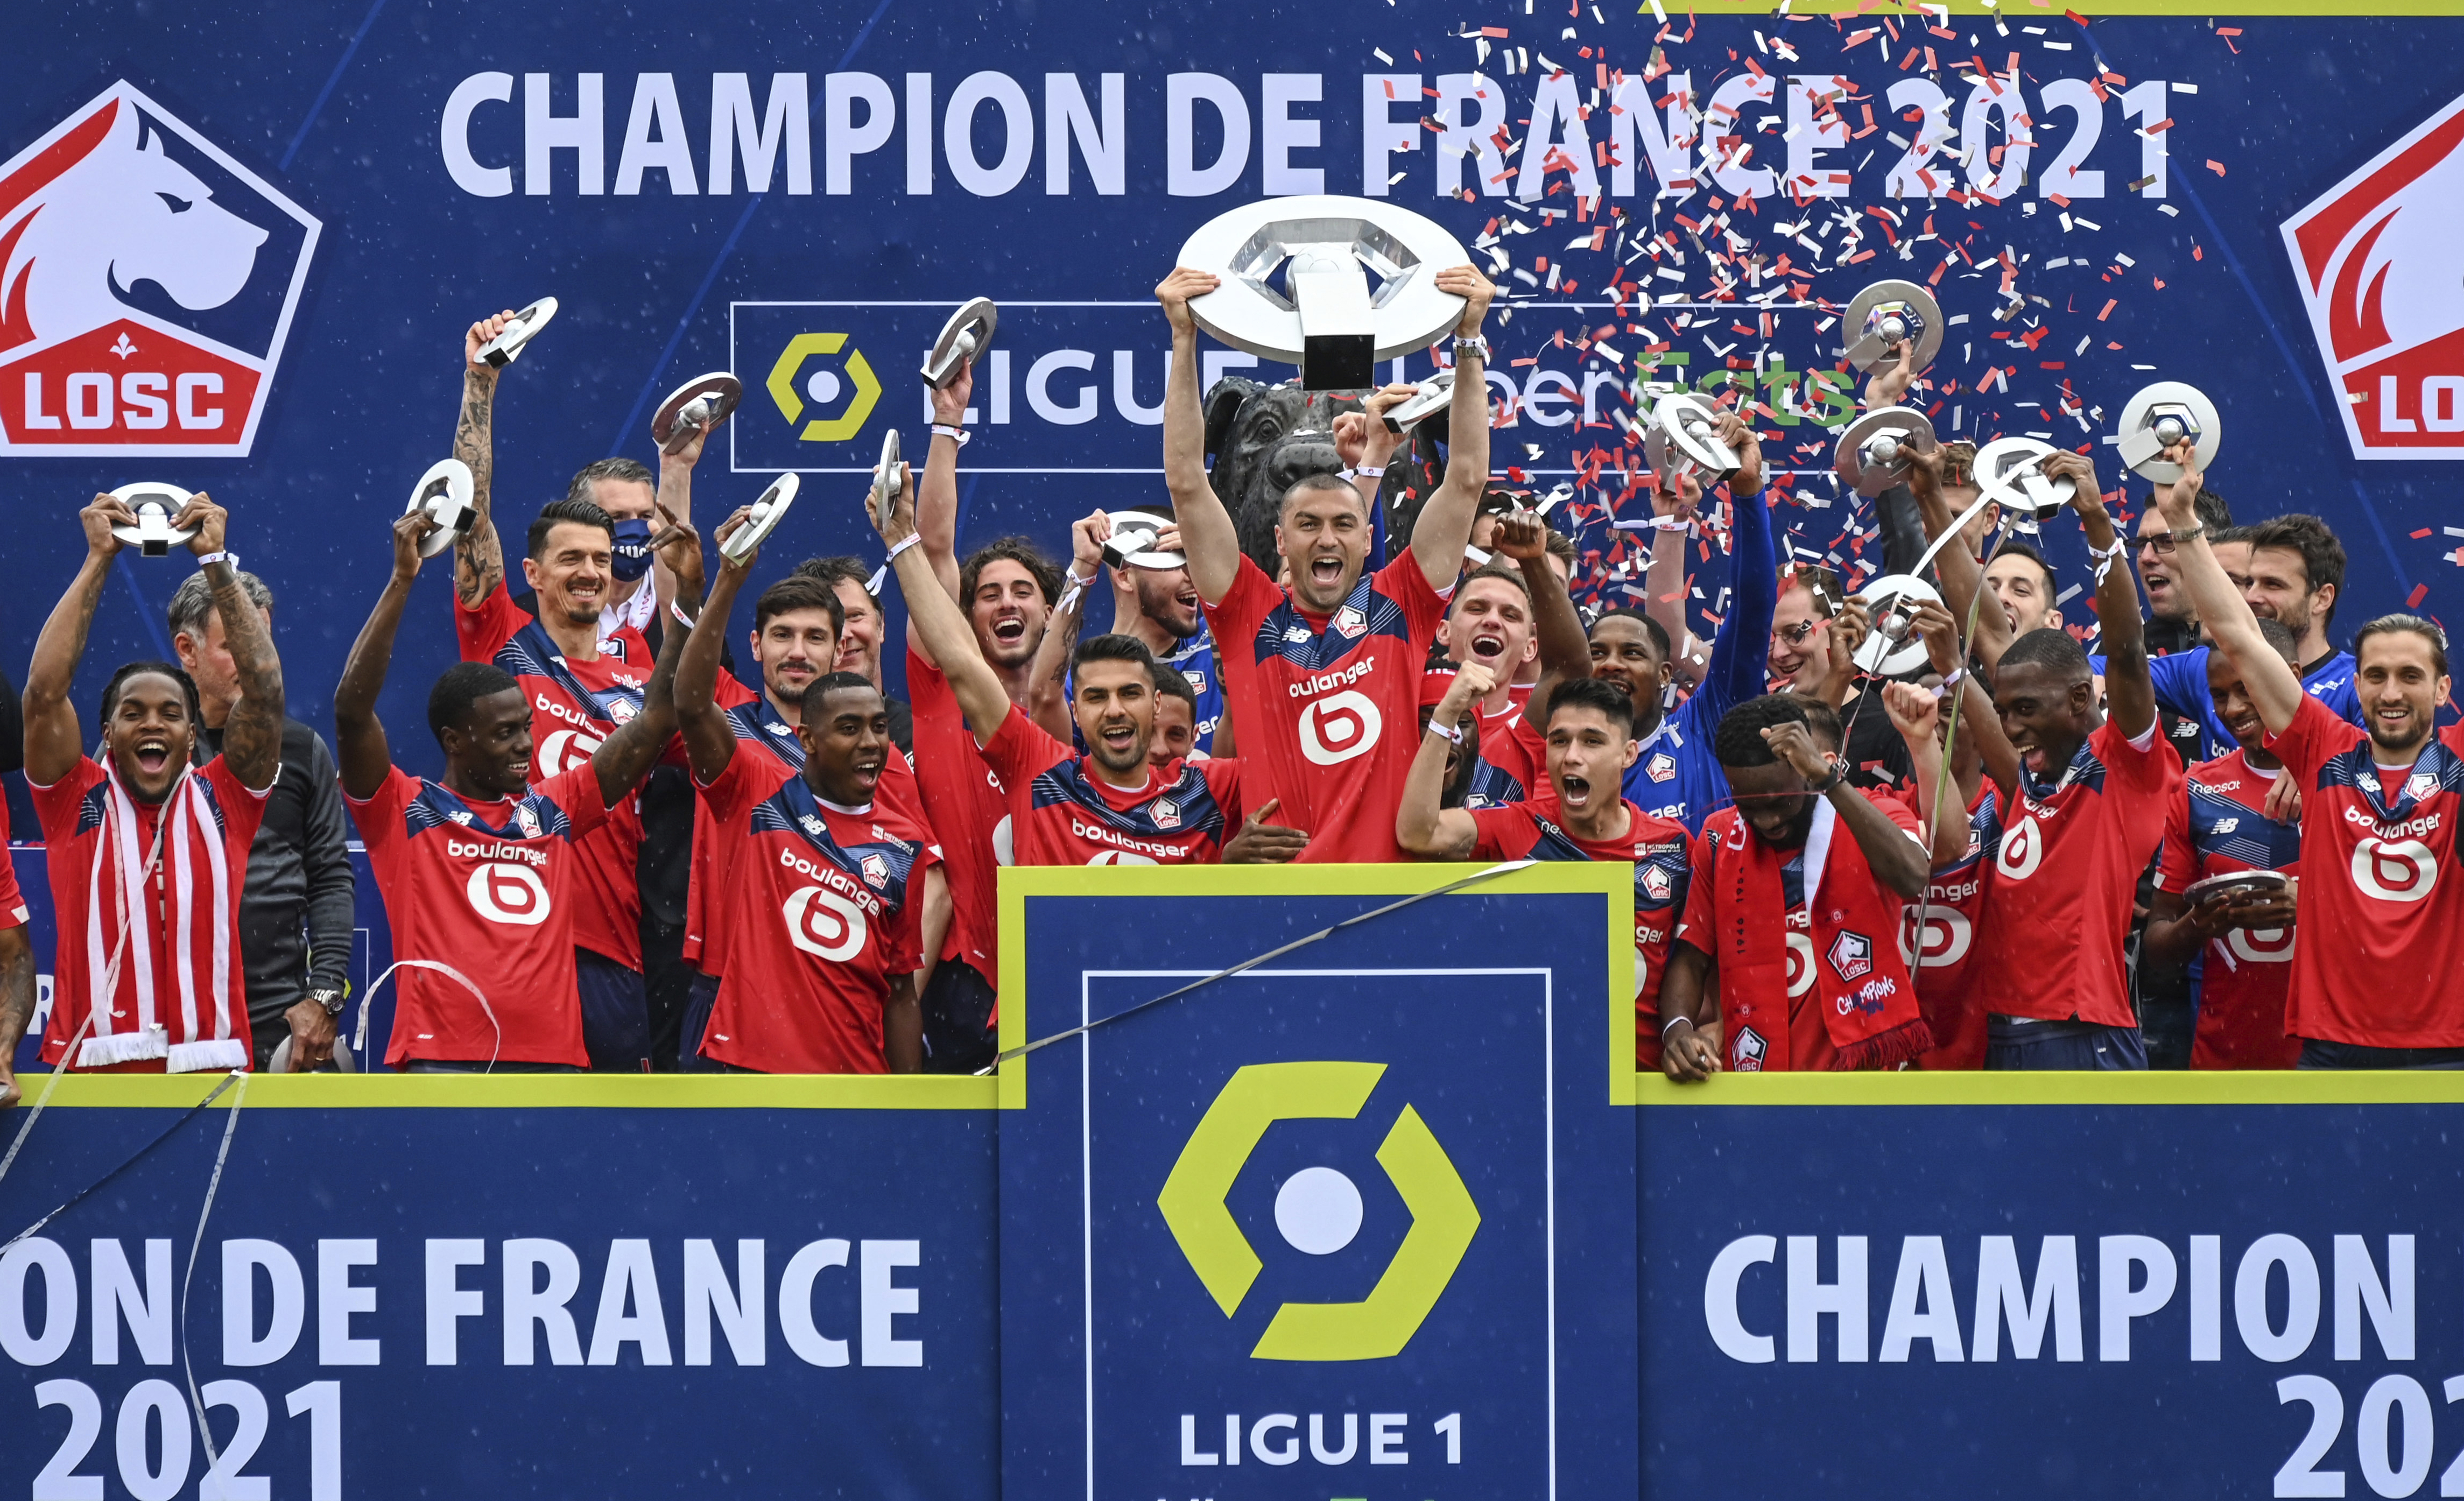 How to watch Frances Ligue 1 in USA Free live streams, TV channel for PSG, Lille, Lyon, Marseille matches